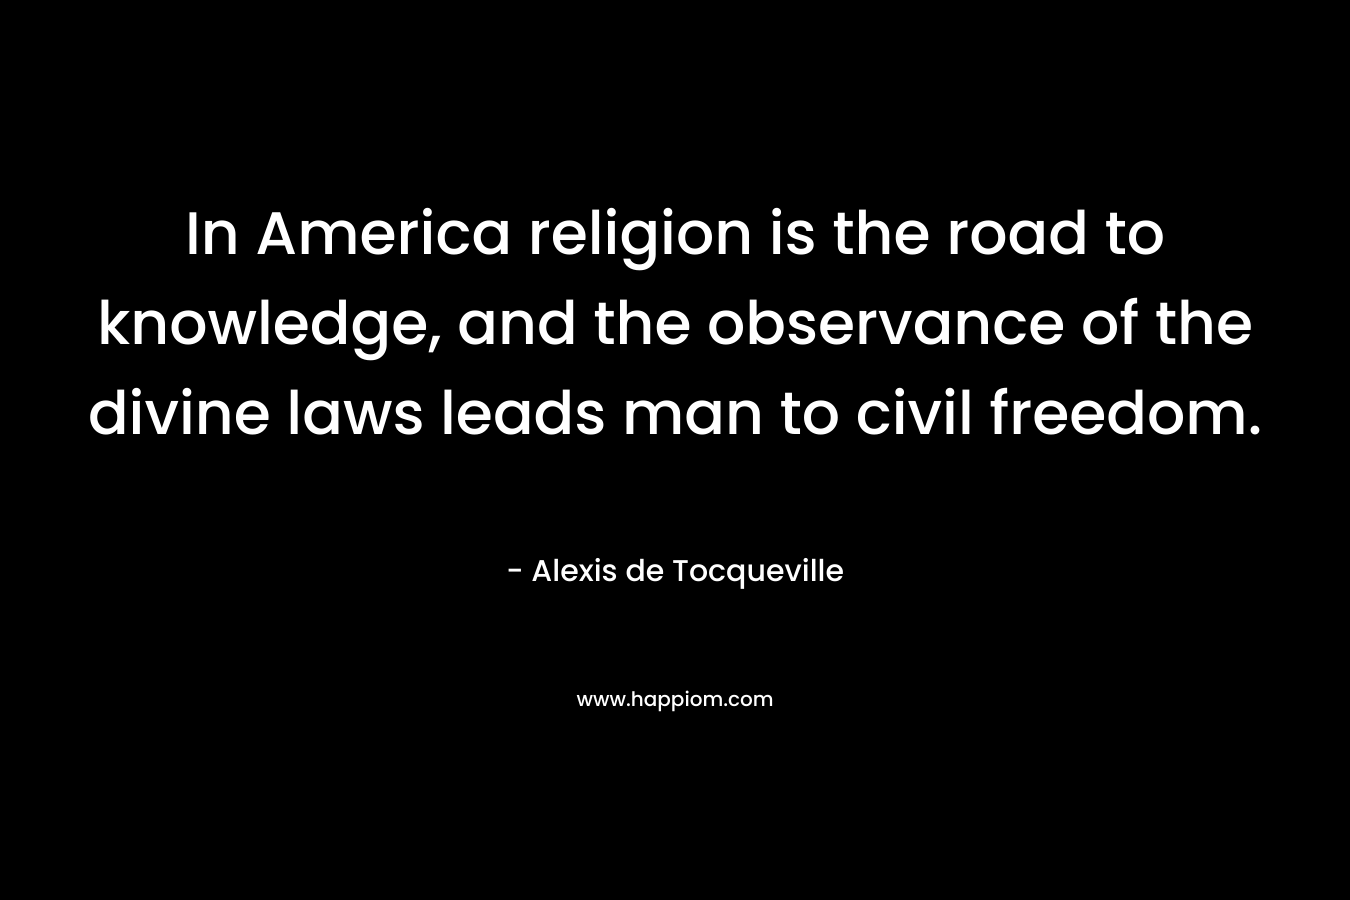 In America religion is the road to knowledge, and the observance of the divine laws leads man to civil freedom. – Alexis de Tocqueville